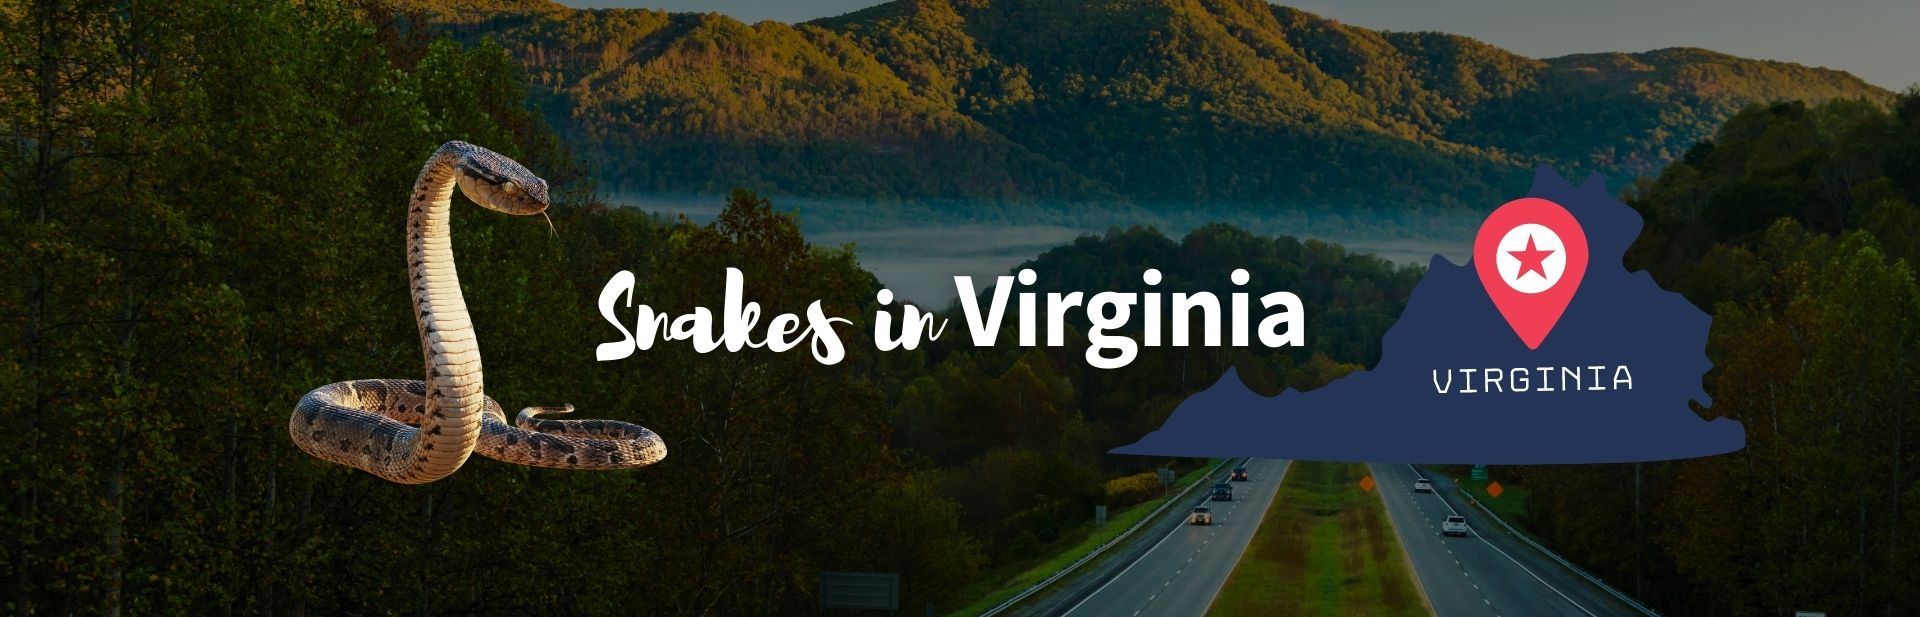 The 14 Snakes in Virginia That You Should Know About